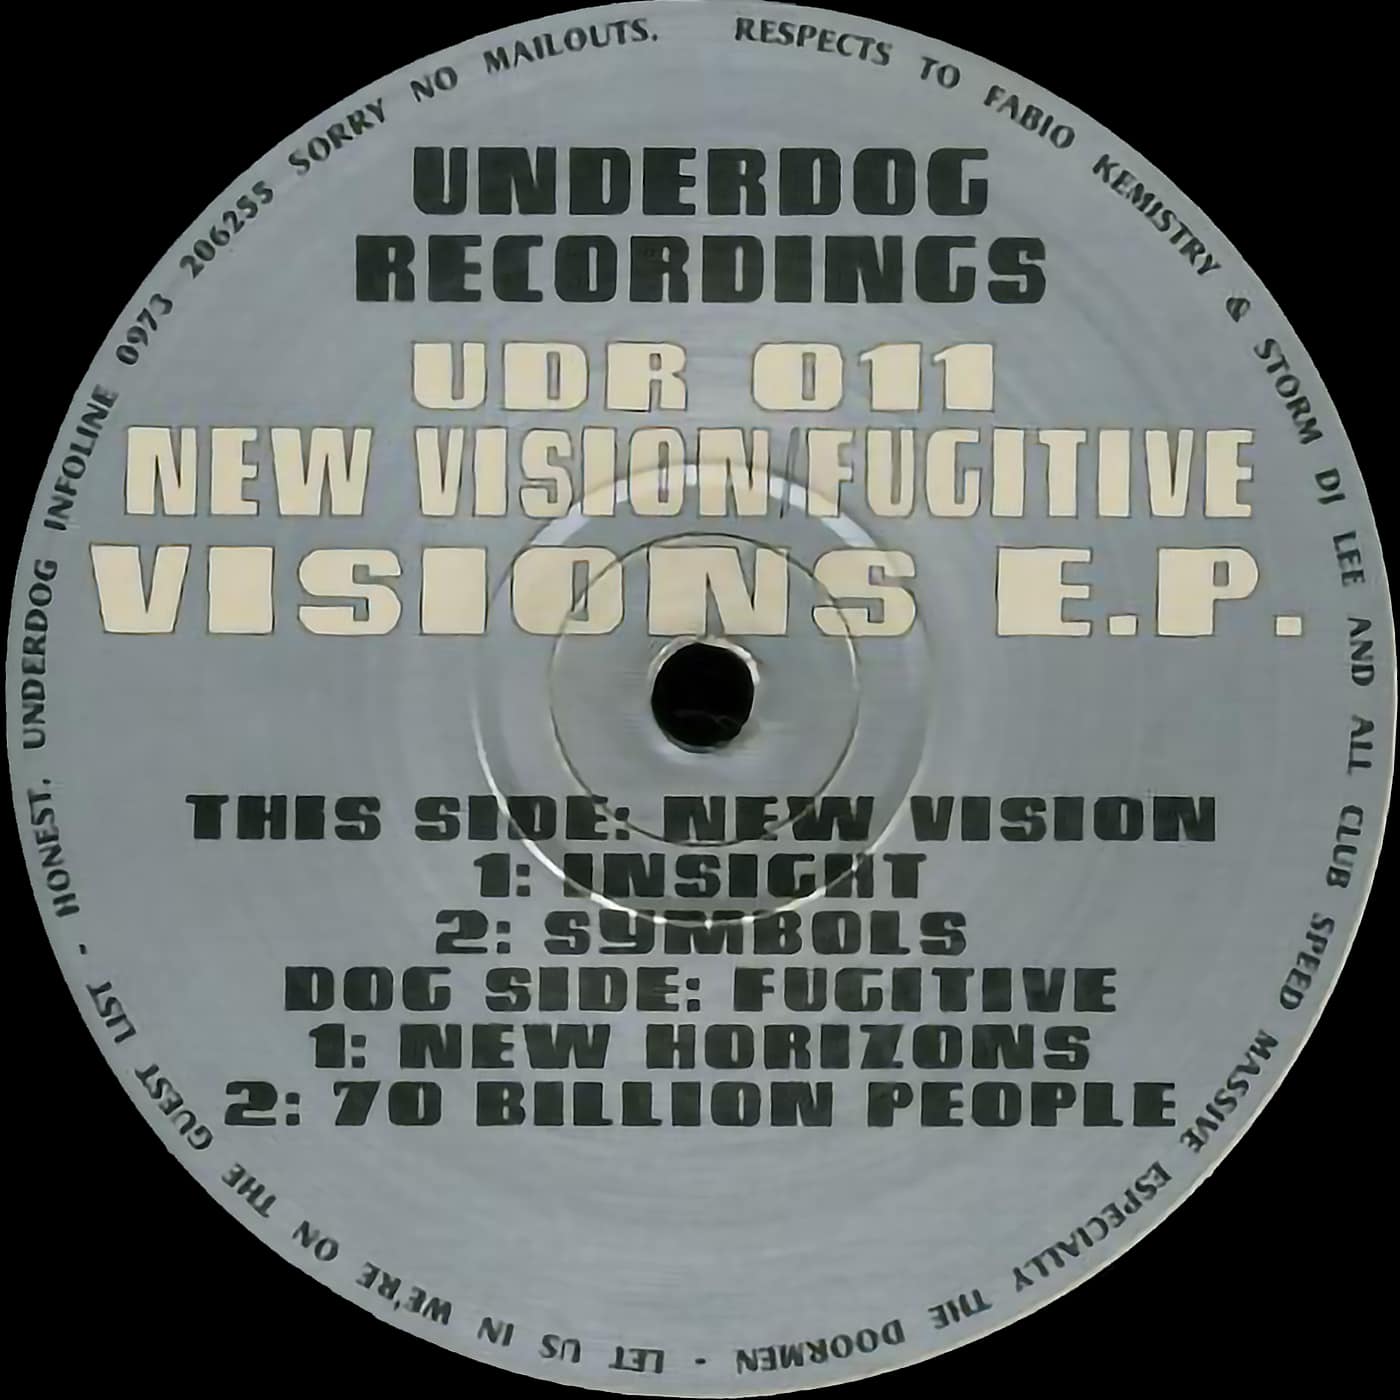 image cover: New Vision, Fugitive - Visions E.P. / UDR 011